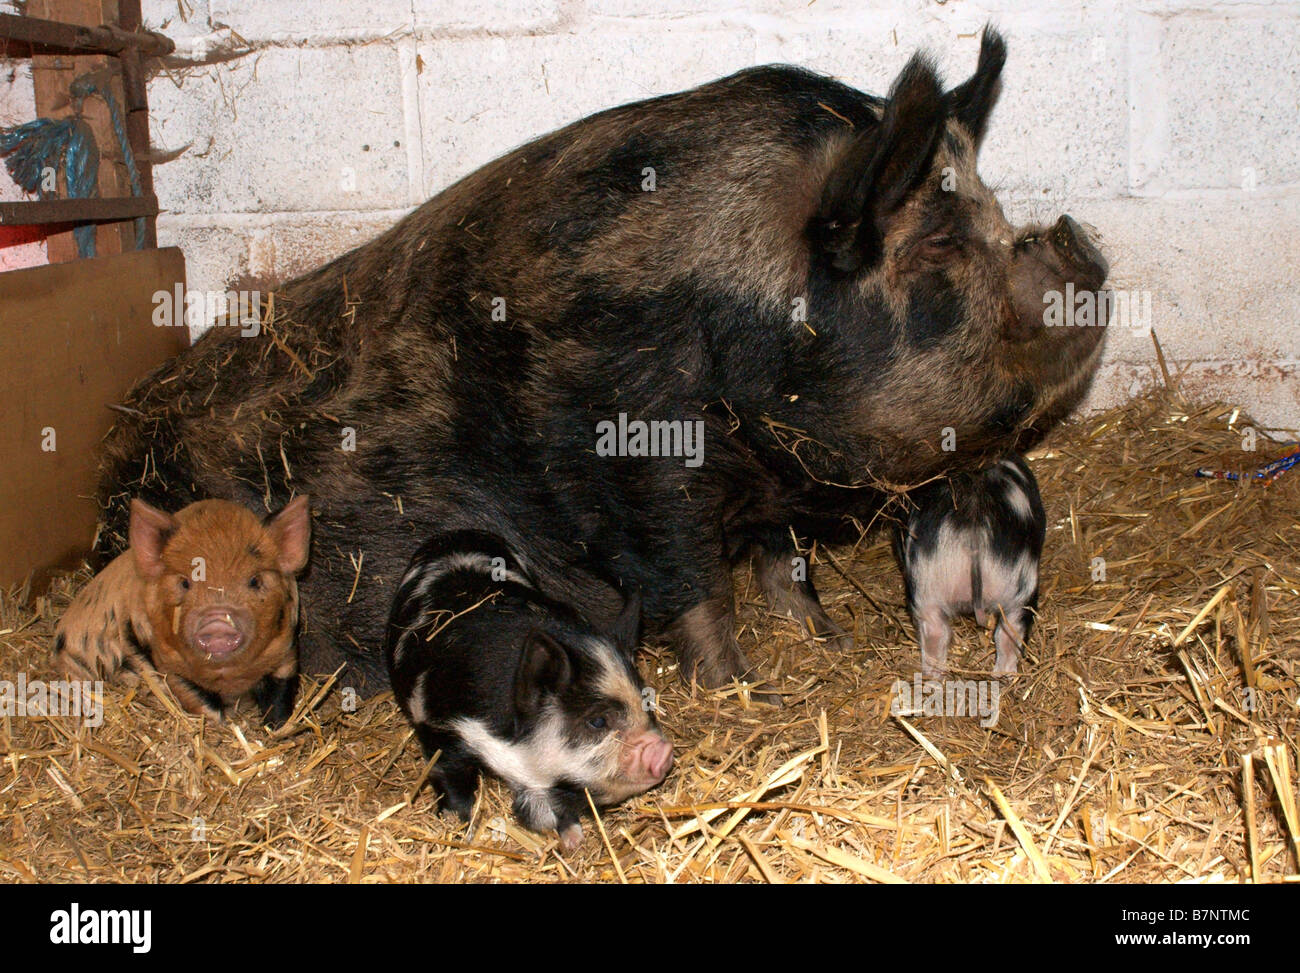 Sow with litter in barn Stock Photo